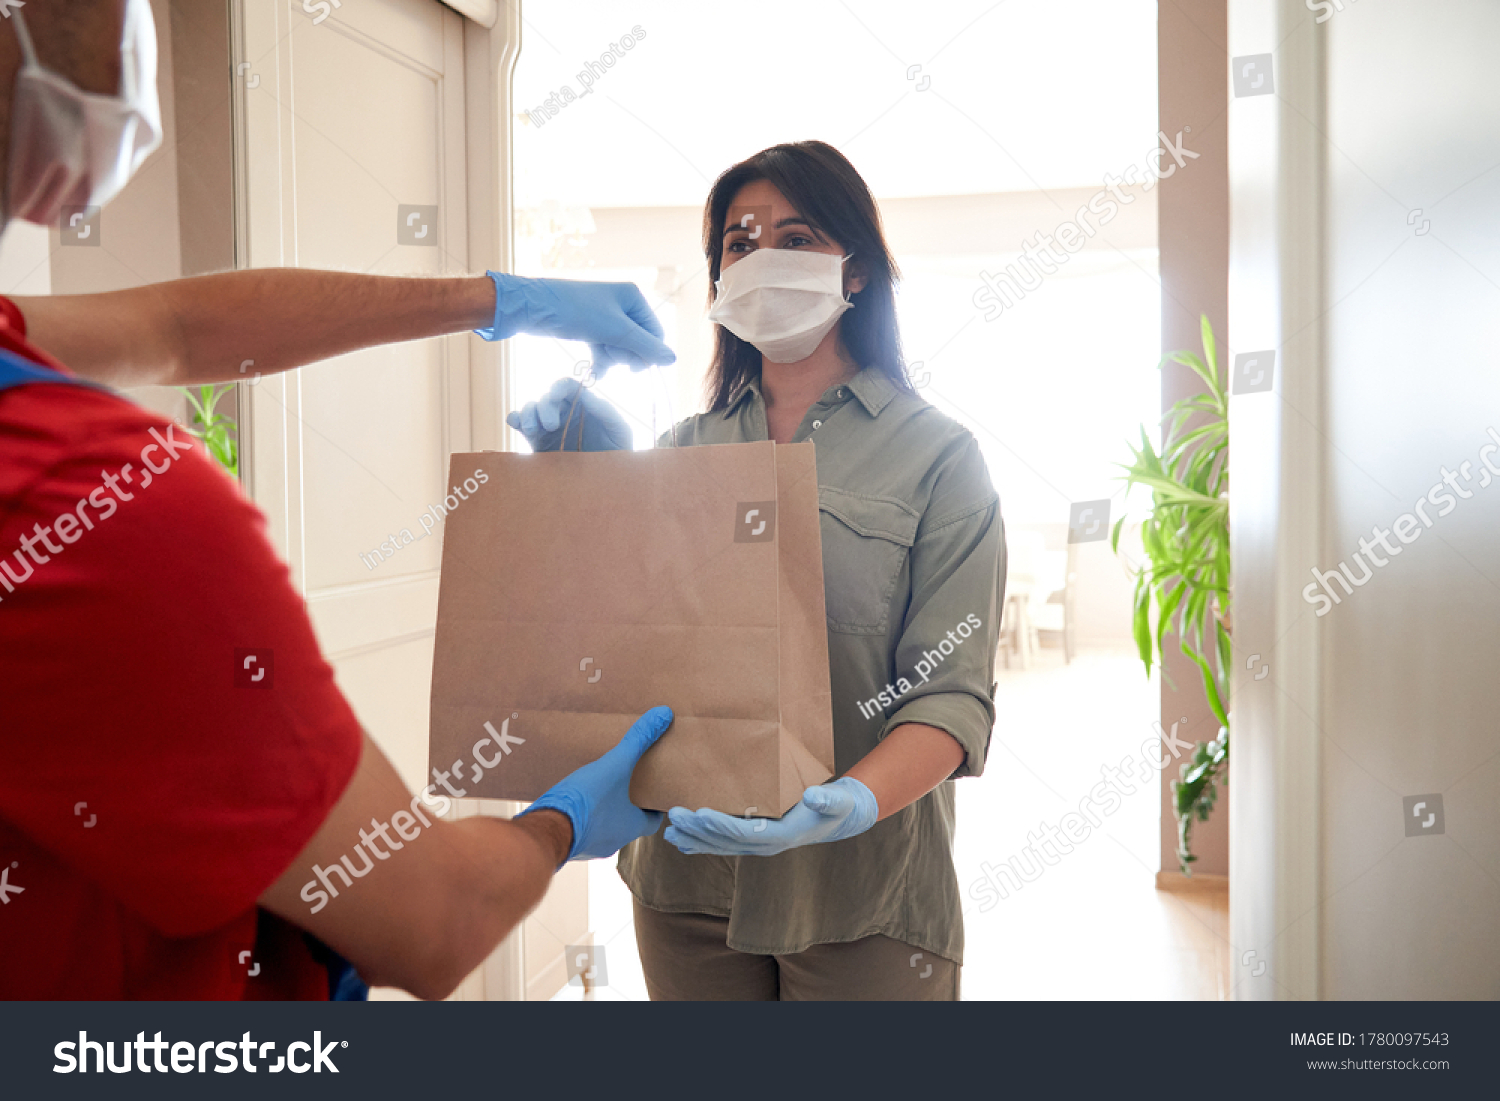 Indian woman customer wearing face mask and gloves taking delivery paper eco bag from man courier holding grocery food package delivering supermarket takeaway order standing at home. Safe delivery. #1780097543